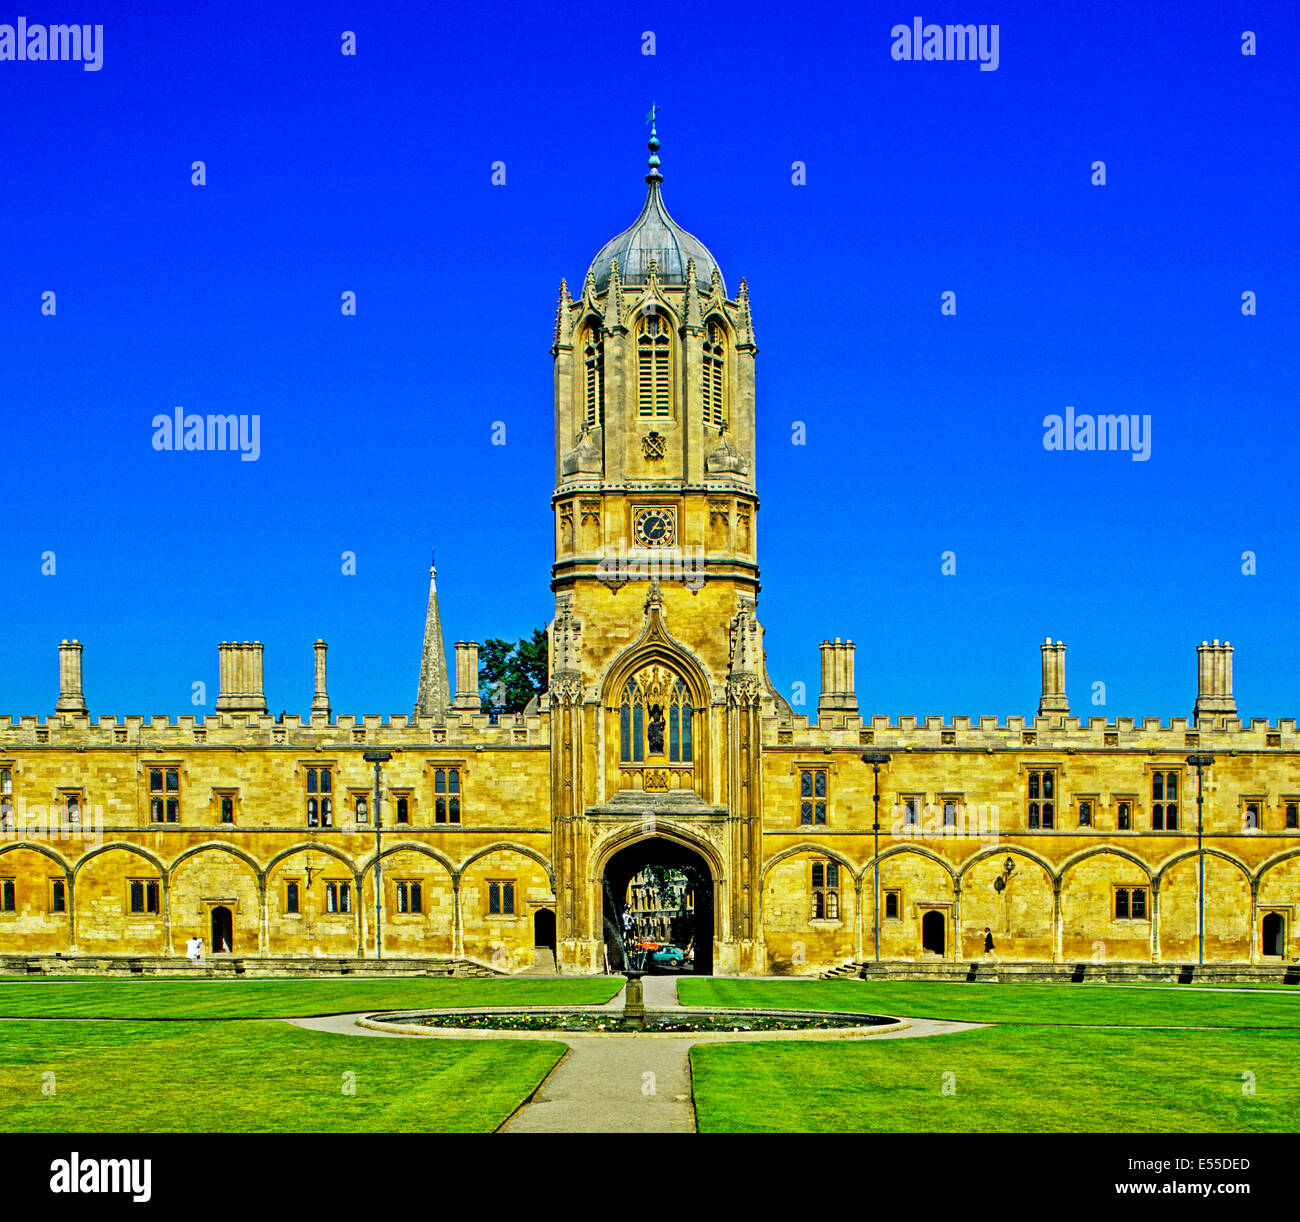 View of Christ Church, Oxford University showing the Tom Tower, Oxford, England, United Kingdom Stock Photo